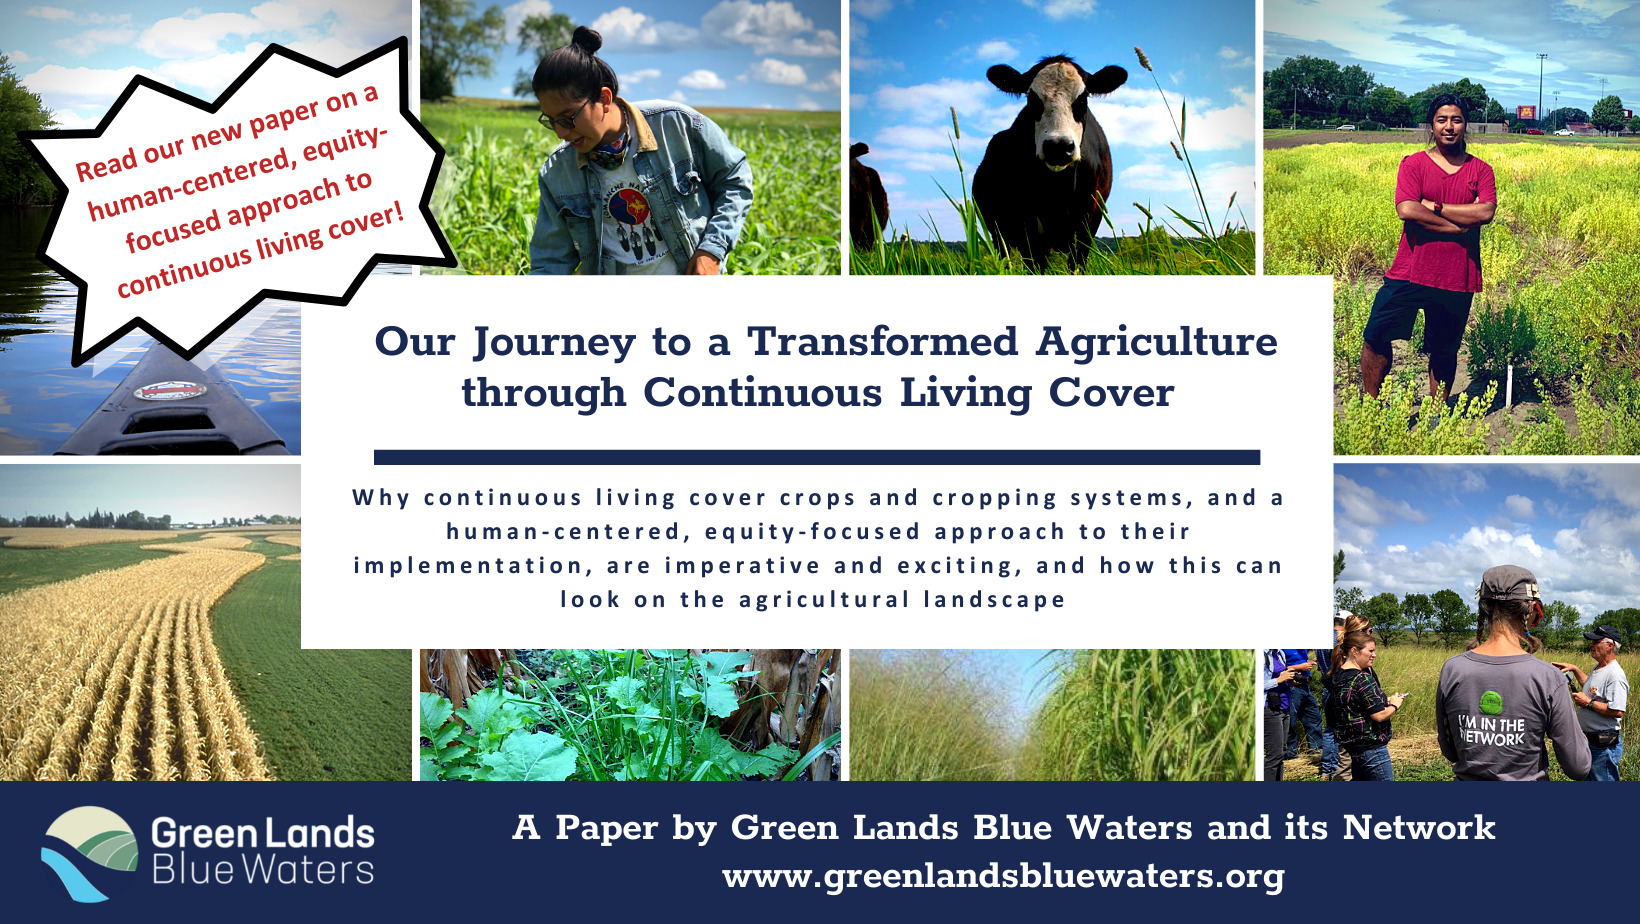 Our Journey to a Transformed Agriculture through Continuous Living Cover